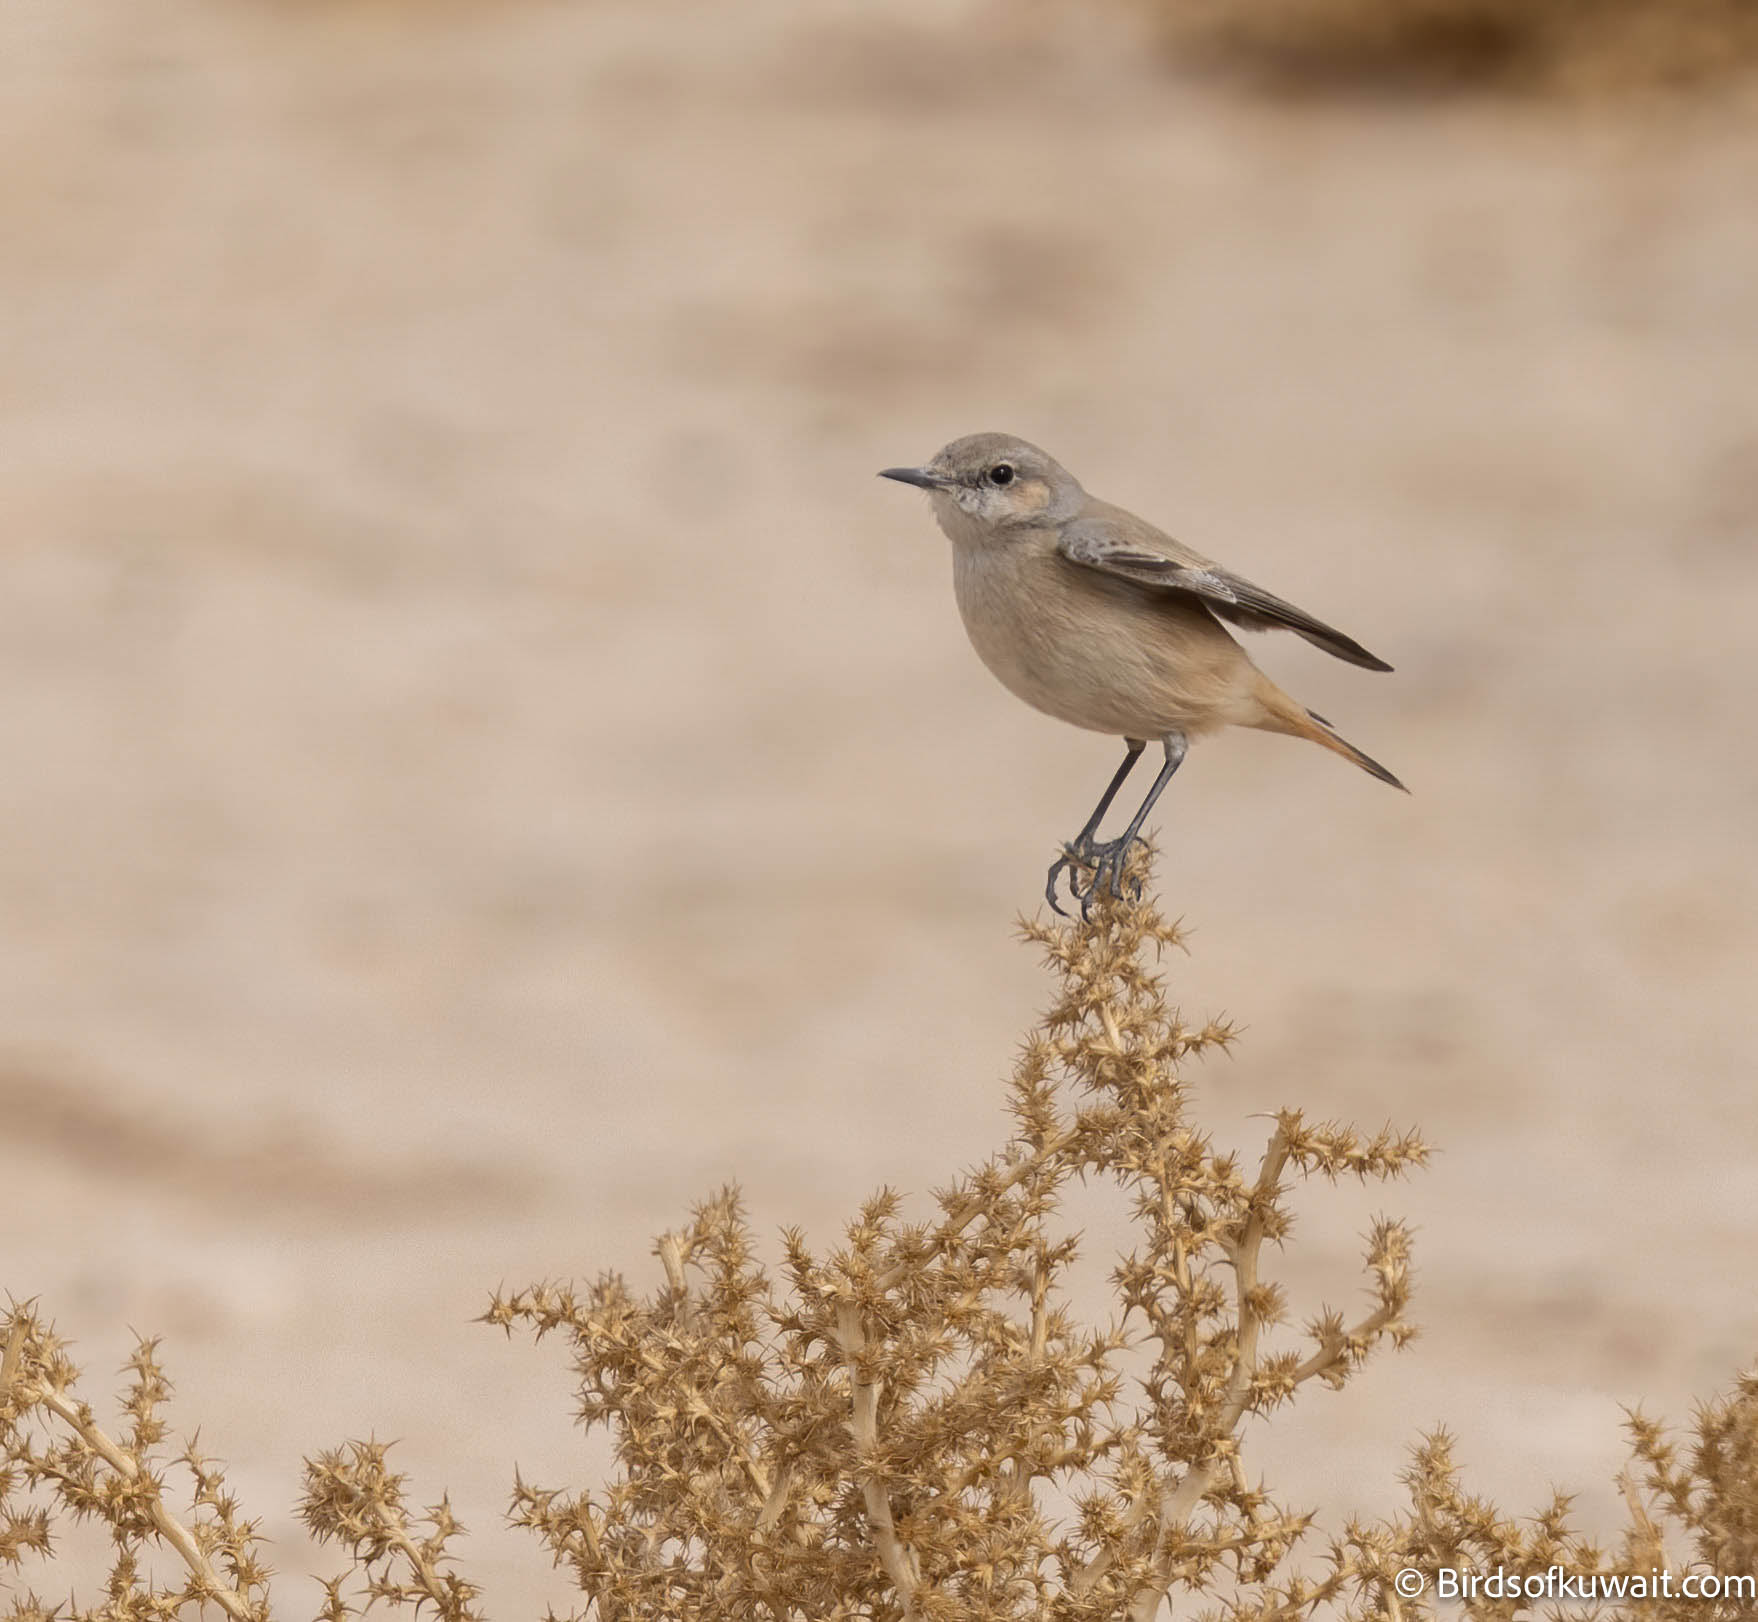 Red-tailed Wheatear Oenanthe chrysopygia